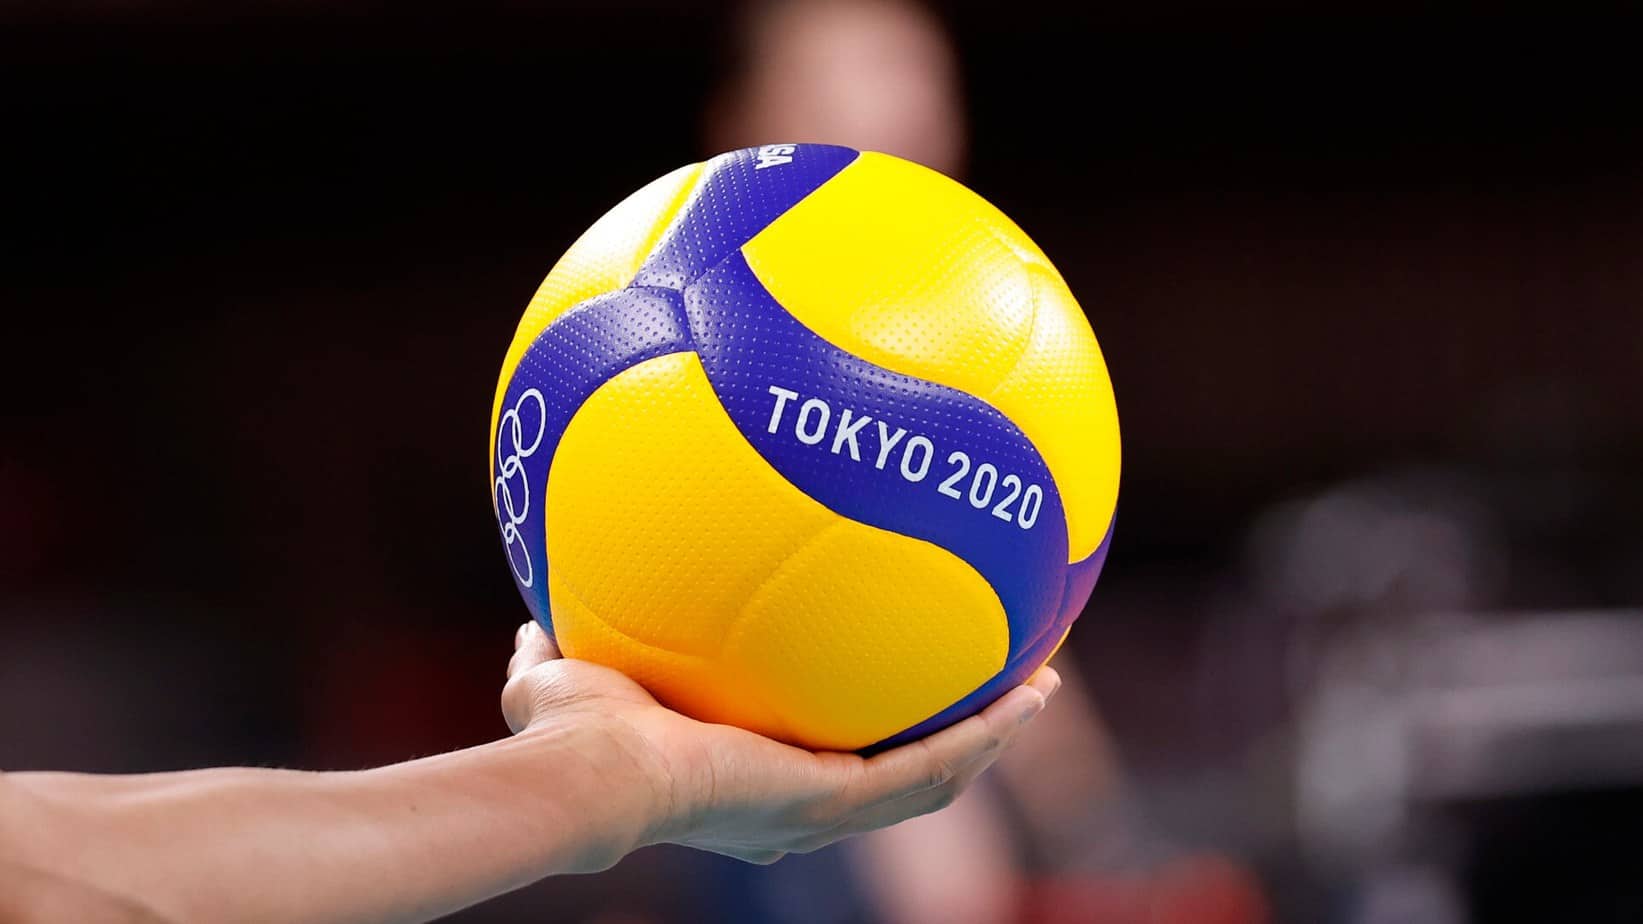 Olympic volleyball men’s semi-finals Tokyo 2020 betting odds